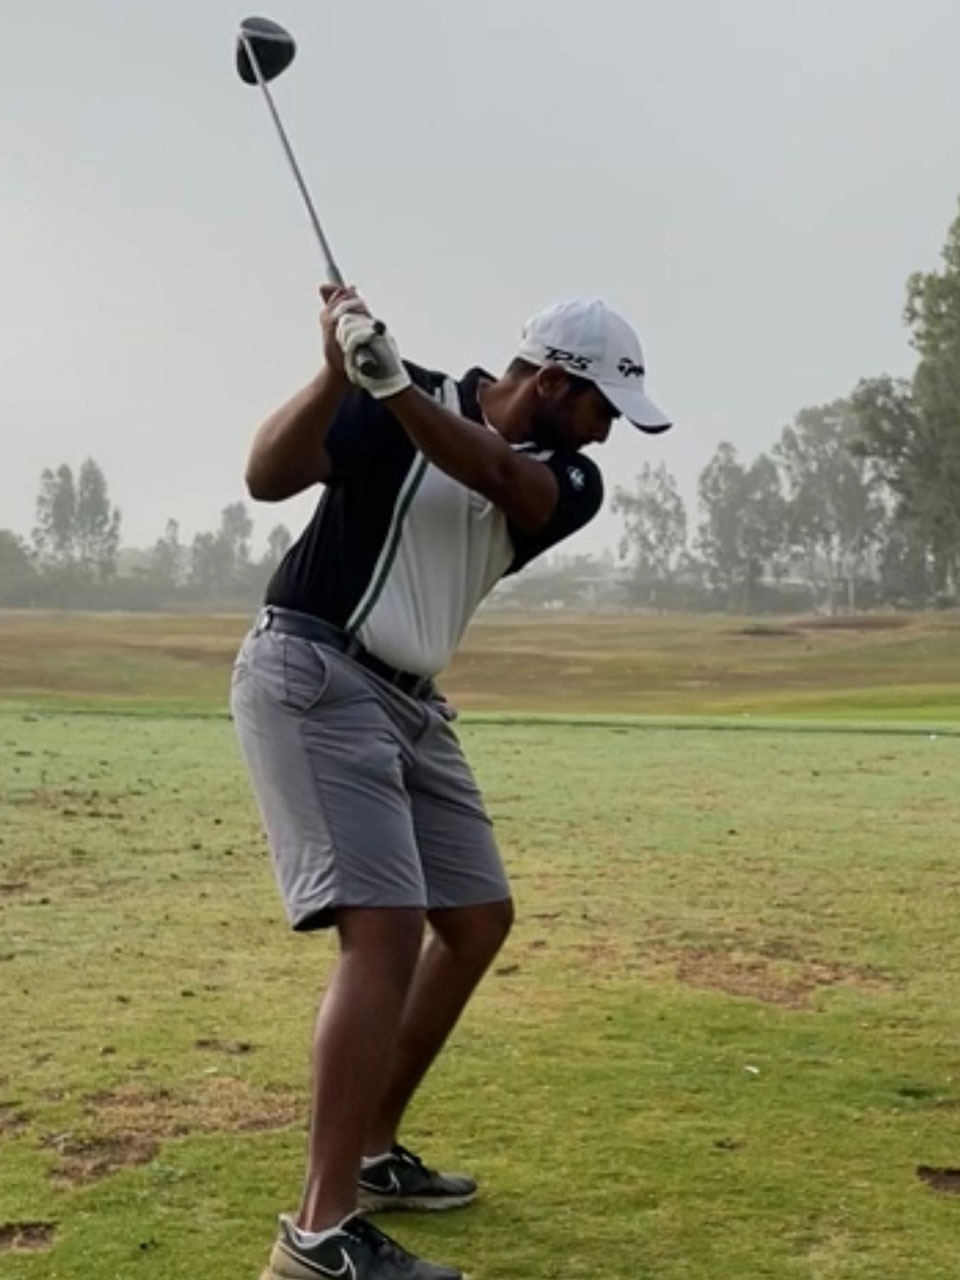 Tej tied second place finish in trying conditions at the Royal Calcutta Golf Club last week